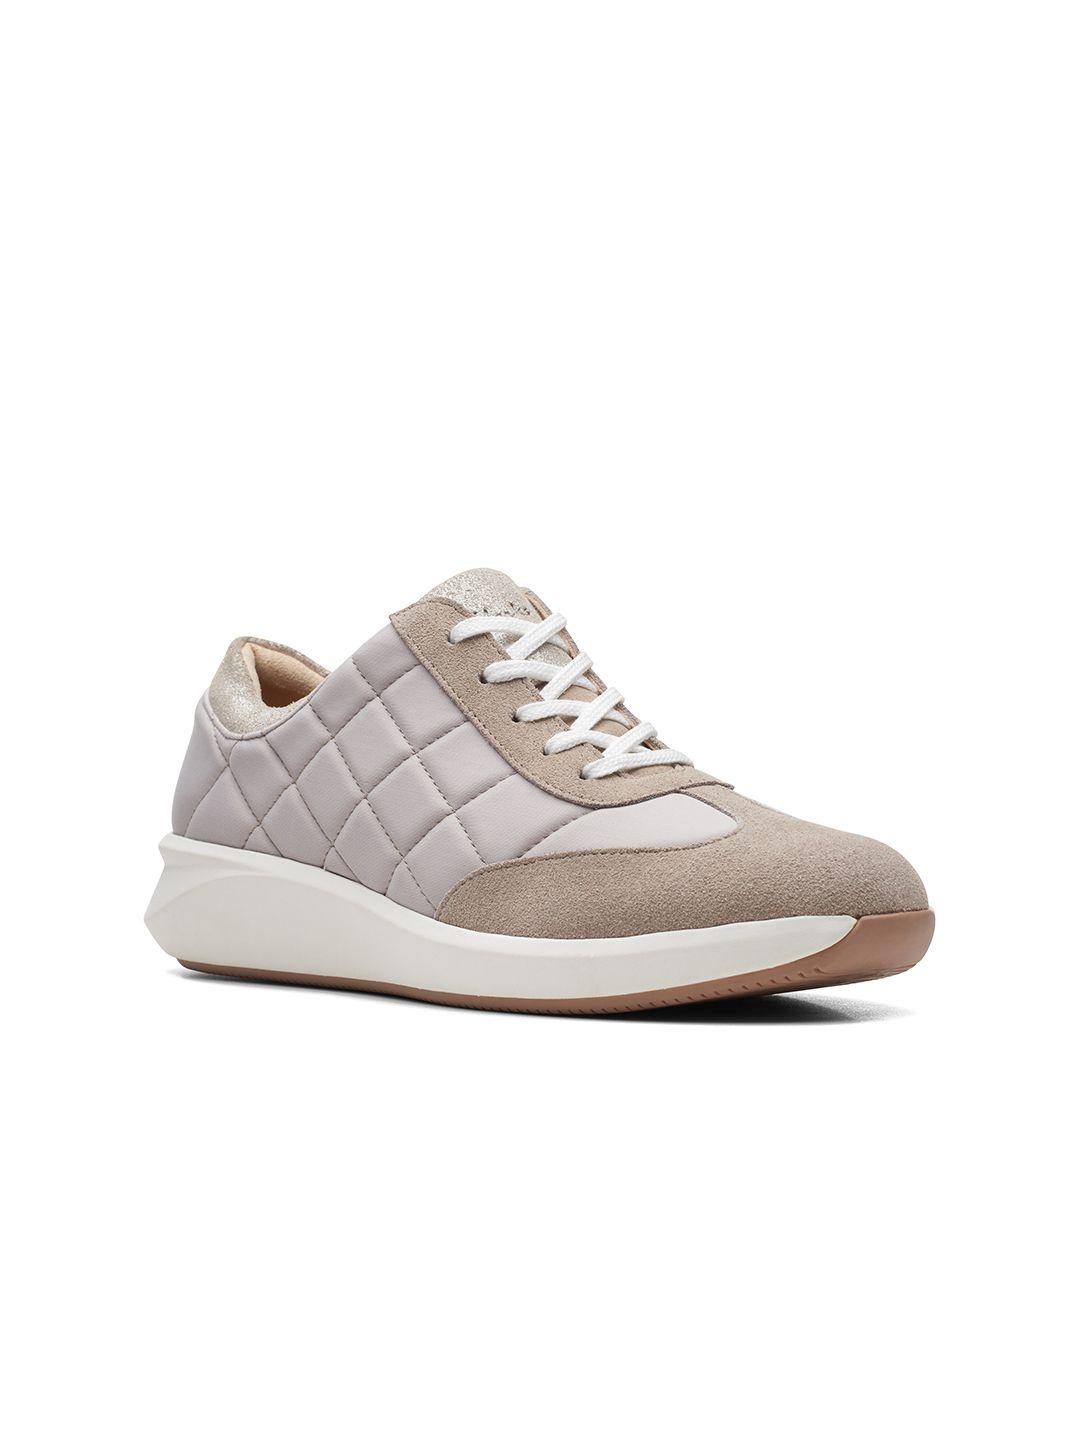 clarks-women-brown-woven-design-leather-sneakers